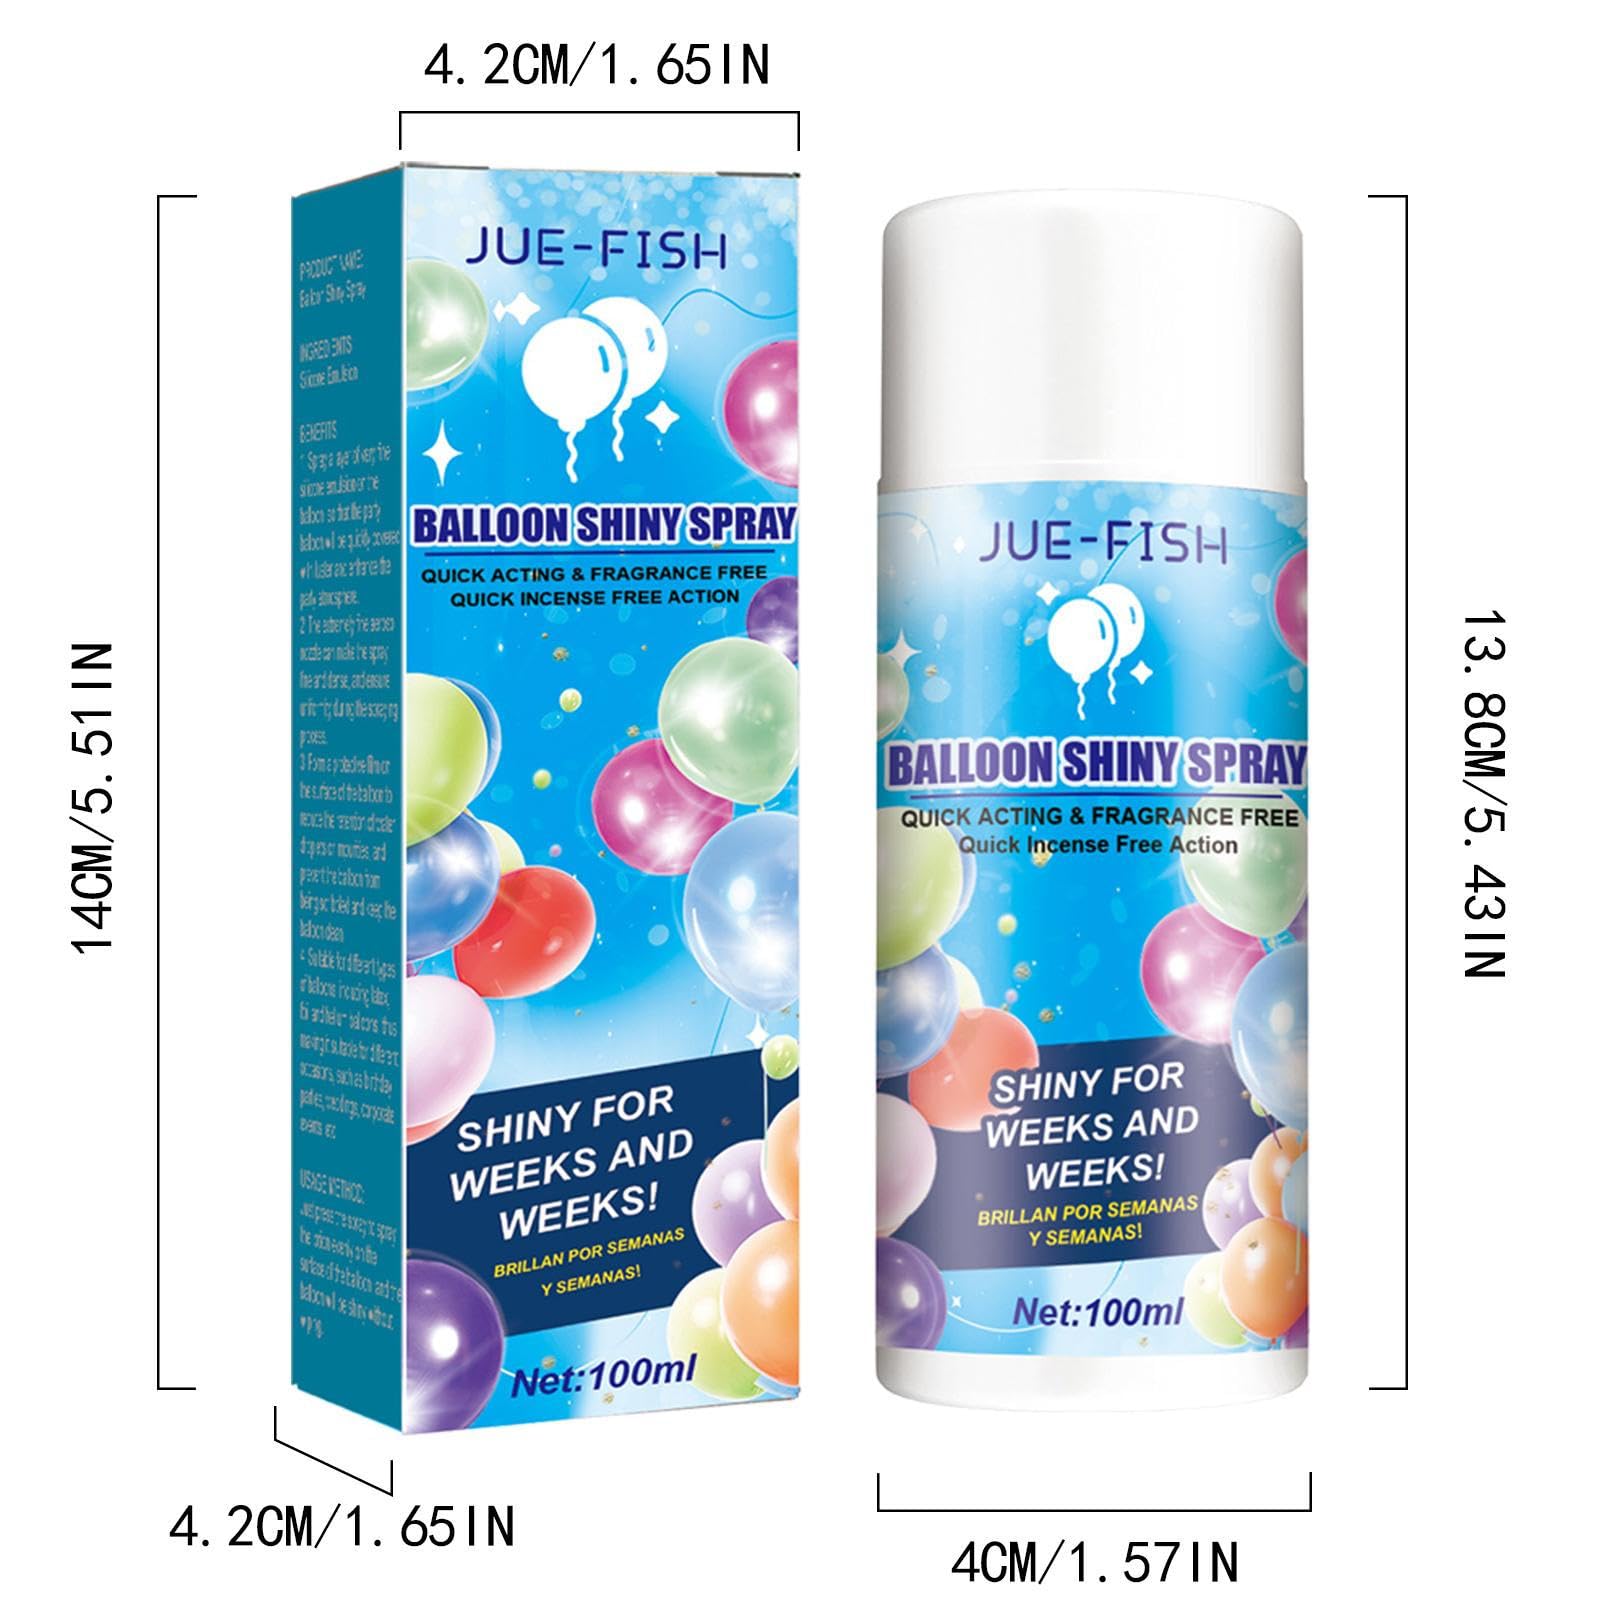 Balloon High Shine Spray for Latex Balloons | Aerosol Balloon Spray,Balloon Spray Shine for an Elegant Hi Gloss Finish in Minutes,Ultra Shiny Glow Spray Party Decoration and Enhancer Shimmer Effect